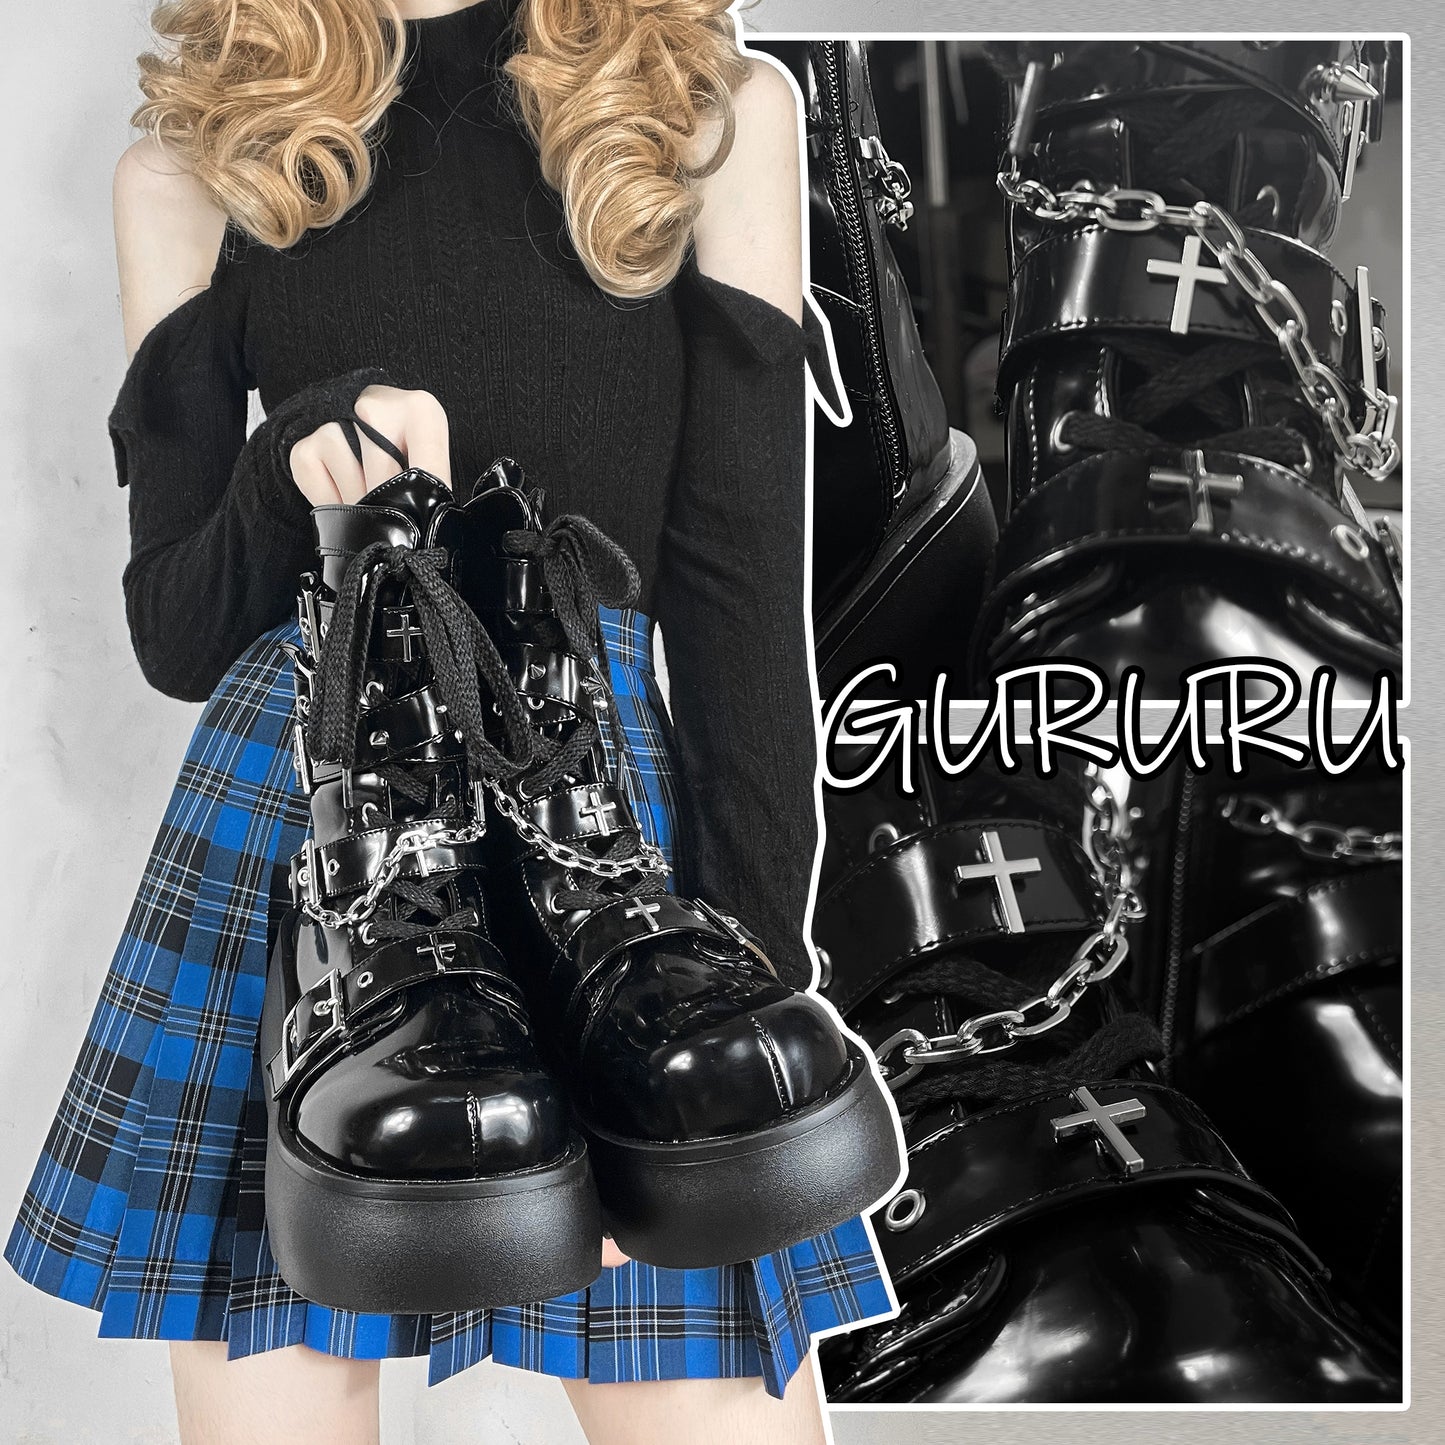 Y2K Spicy Girl Cross Black White Platform Shoes Boots 28962:343852